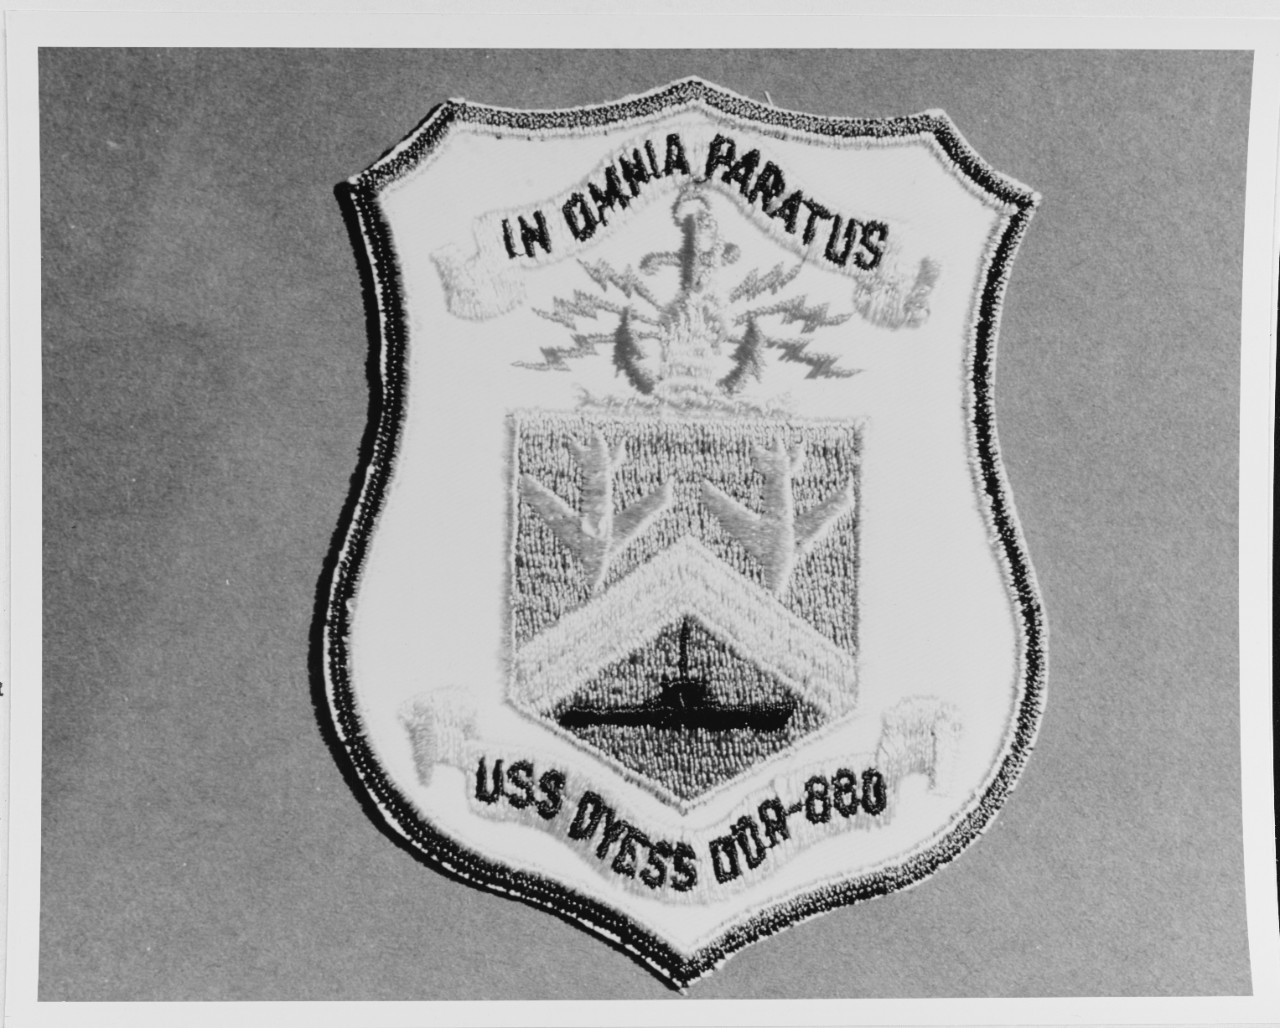 Insignia: USS DYESS (DDR-880)